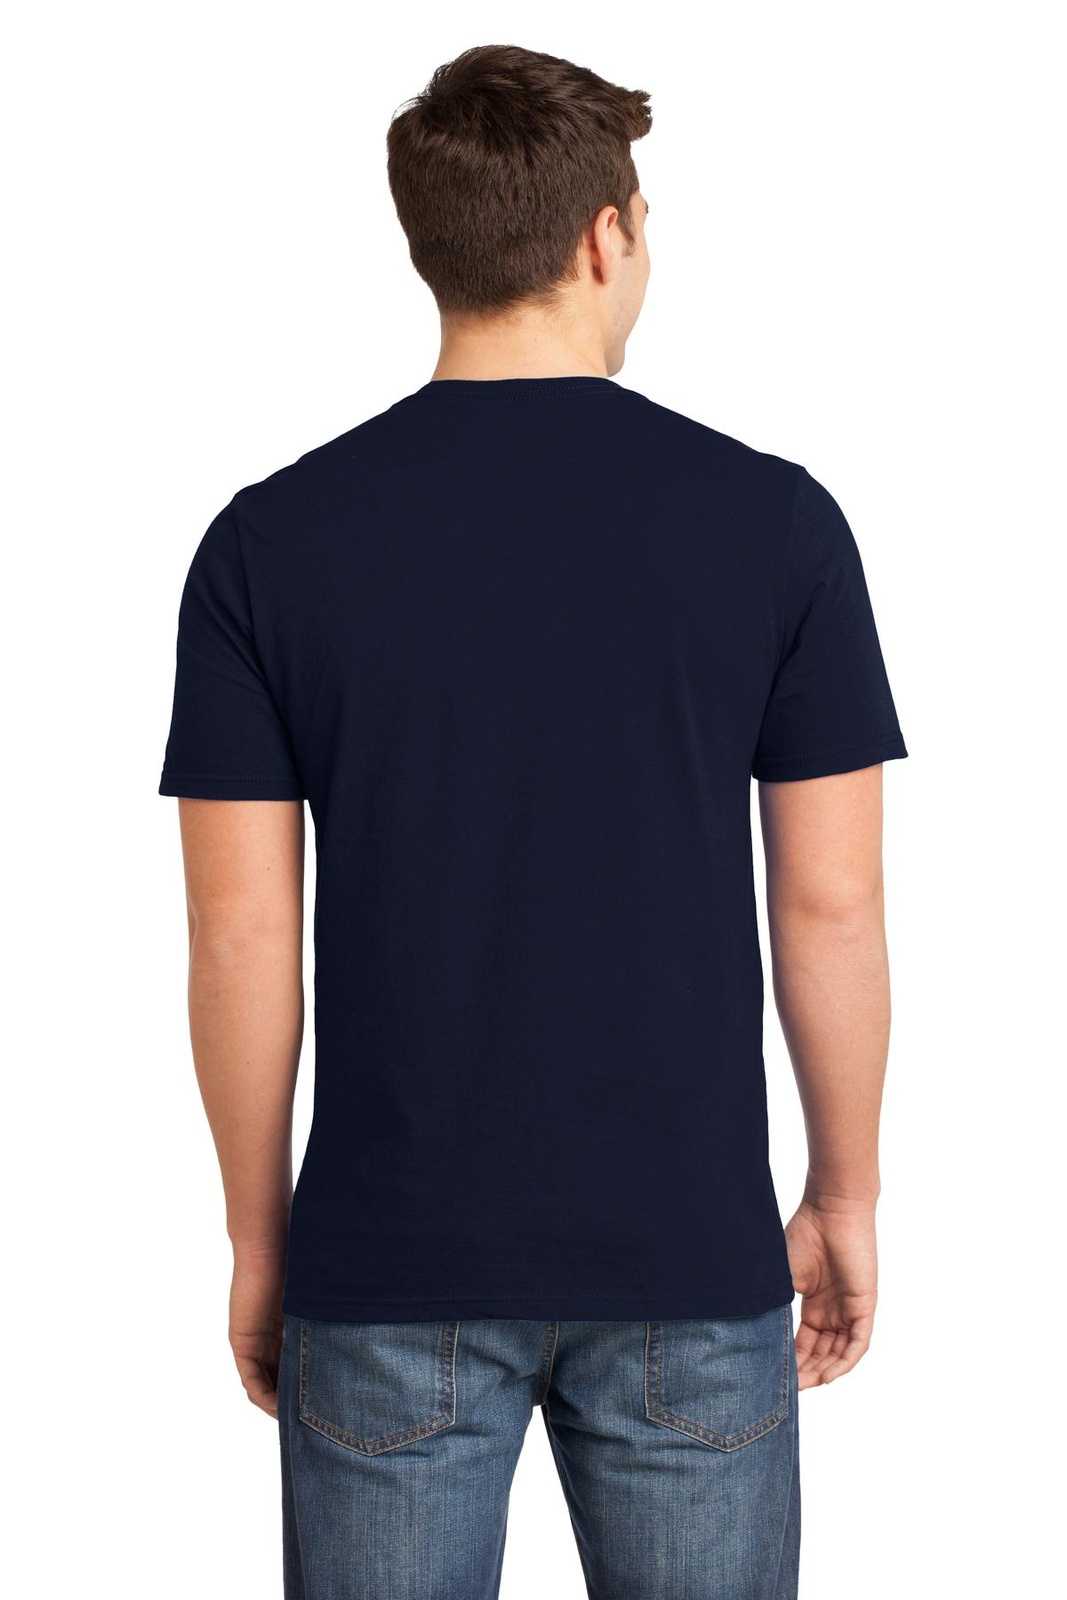 District DT6000 Very Important Tee - New Navy - HIT a Double - 1